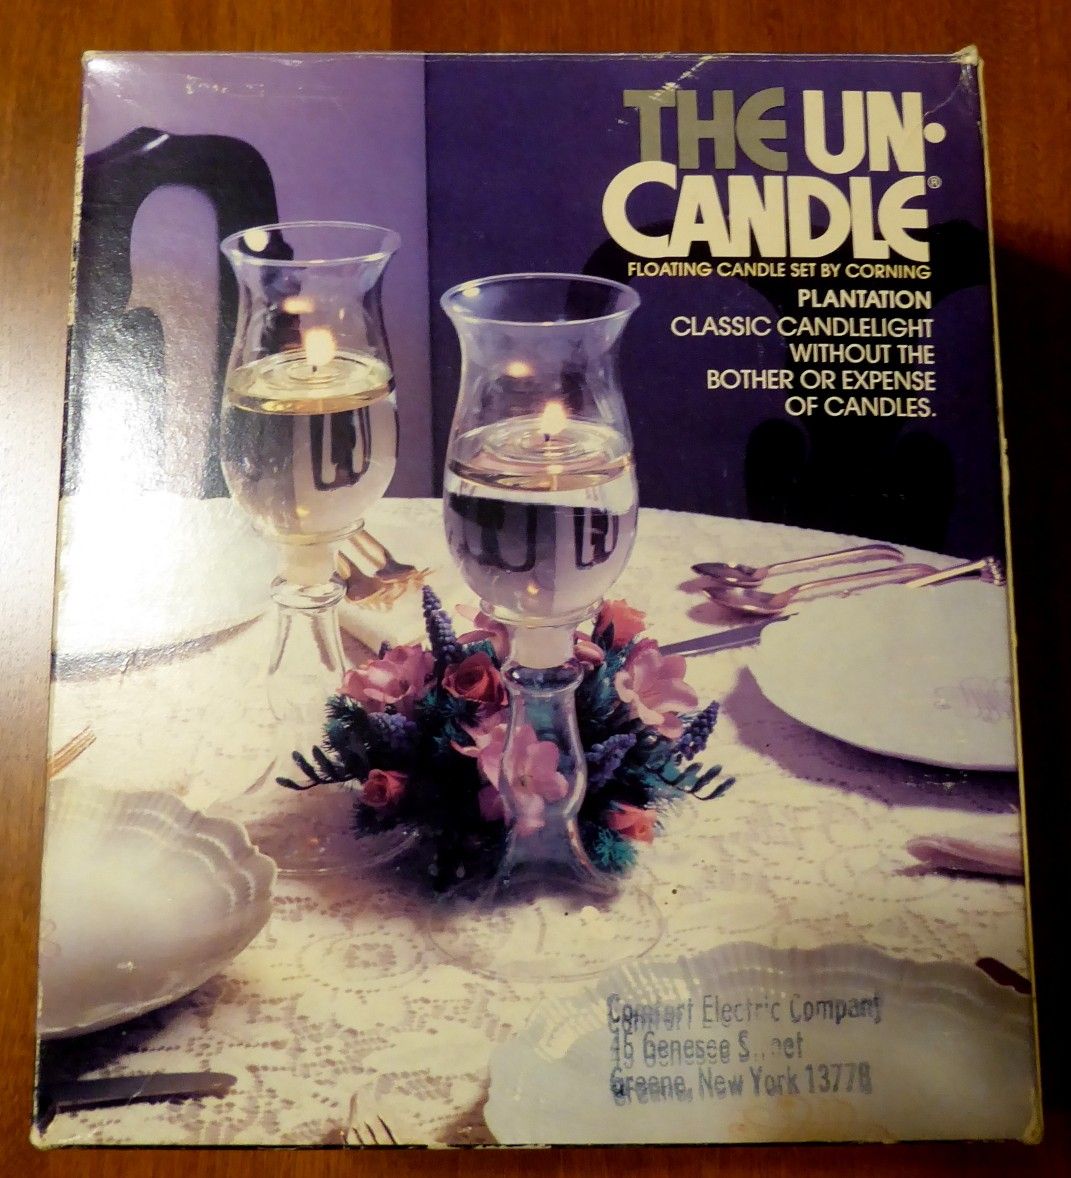 The Un-Candle Plantation Floating Candlestick Set by Corning